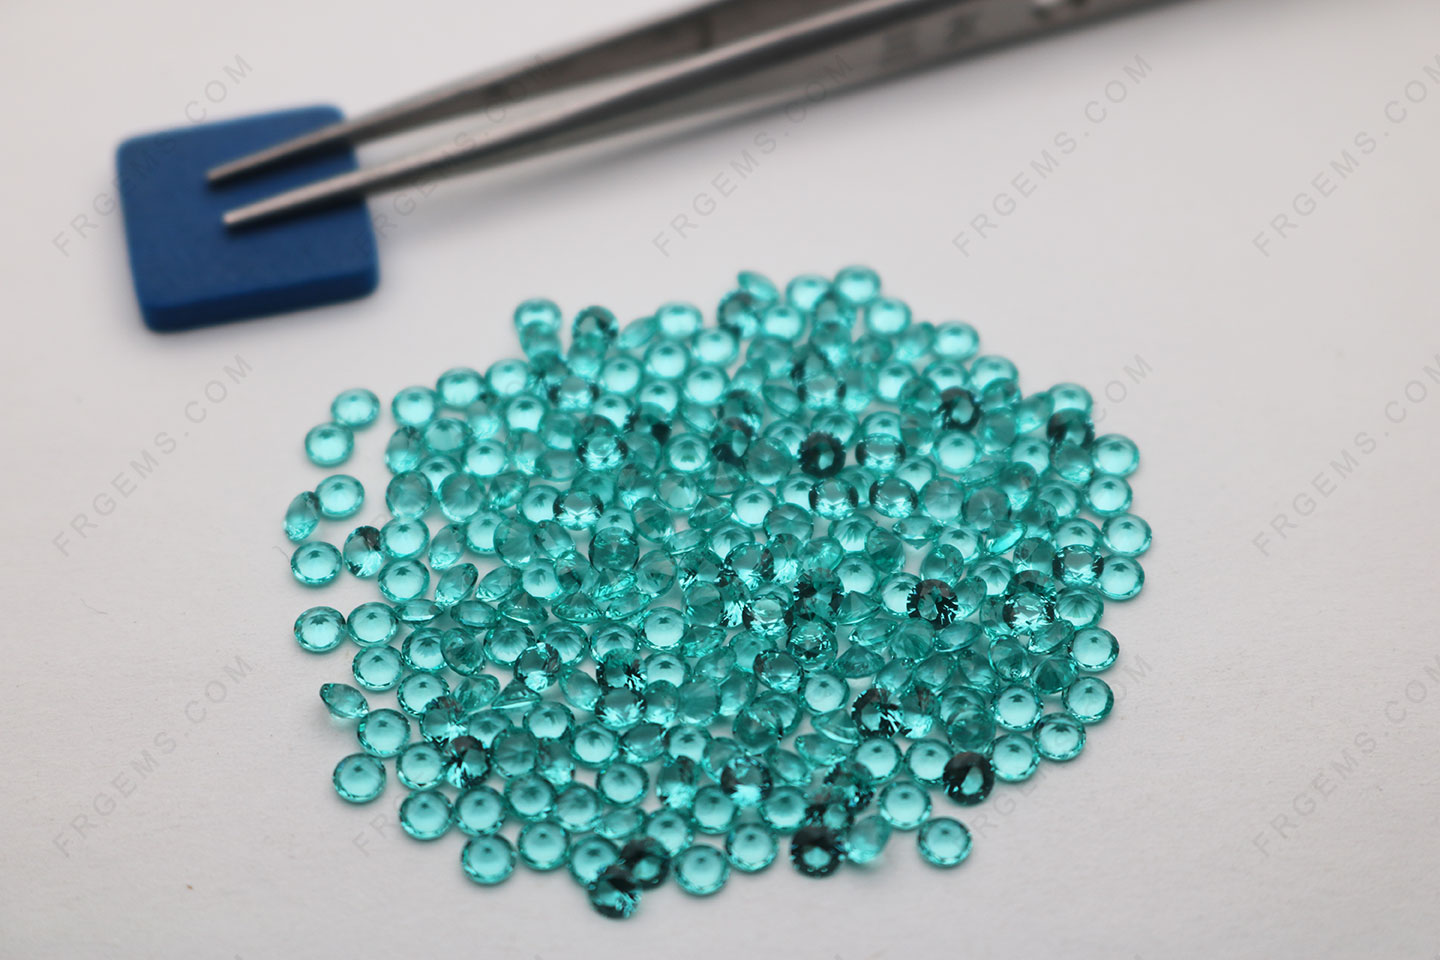 Loose Nano Crystal Paraiba Teal Green Color #107 Round shape Faceted Cut 3mm gemstones